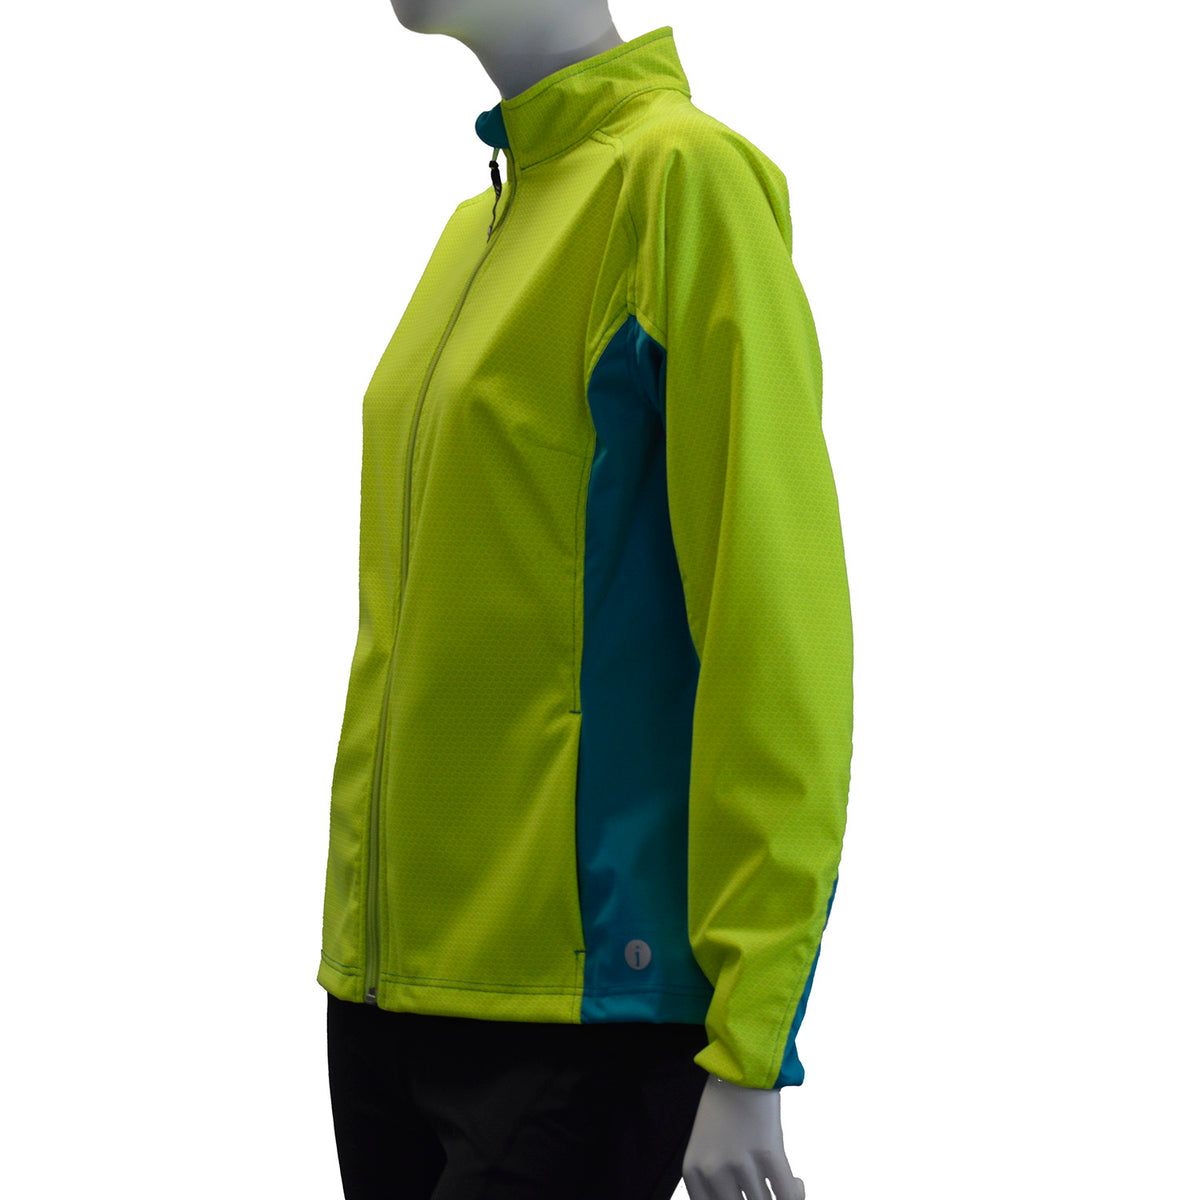 Dover Women's Softshell Reflective Running Jacket in Flo Lime/Peacock